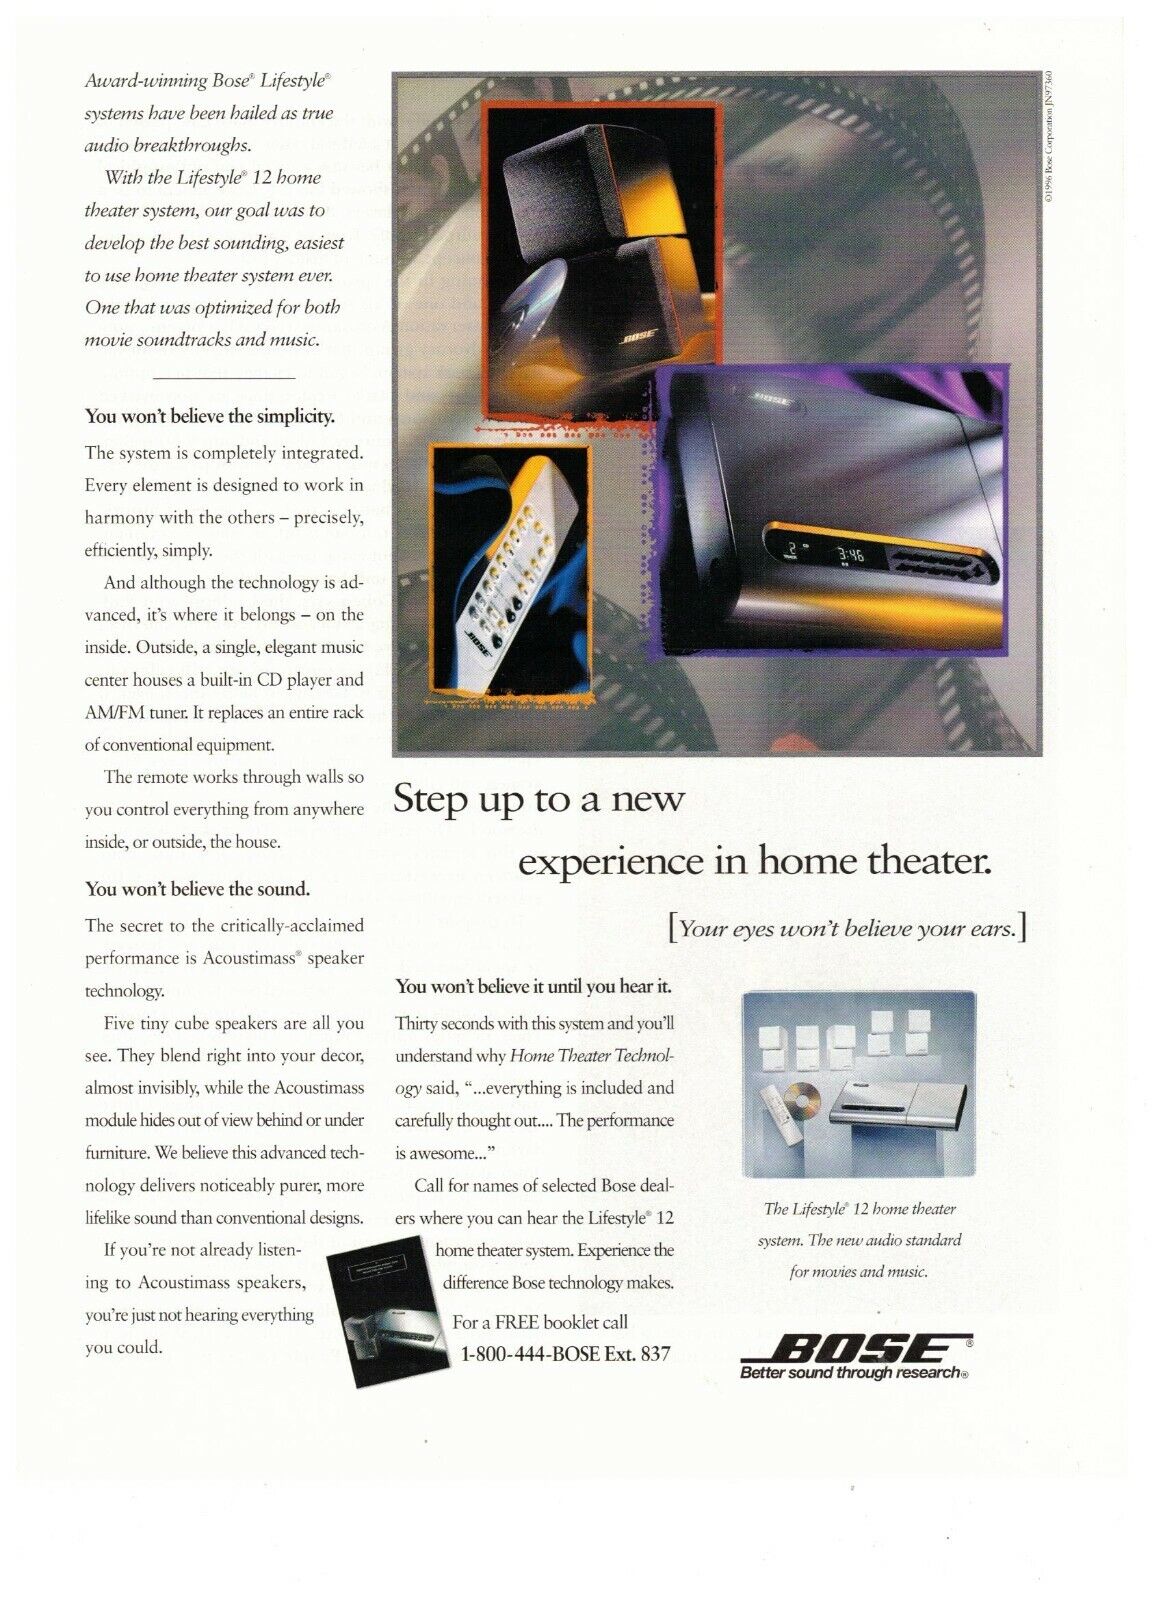 1997 Bose Home Theater New Experience Vintage Print Advertisement